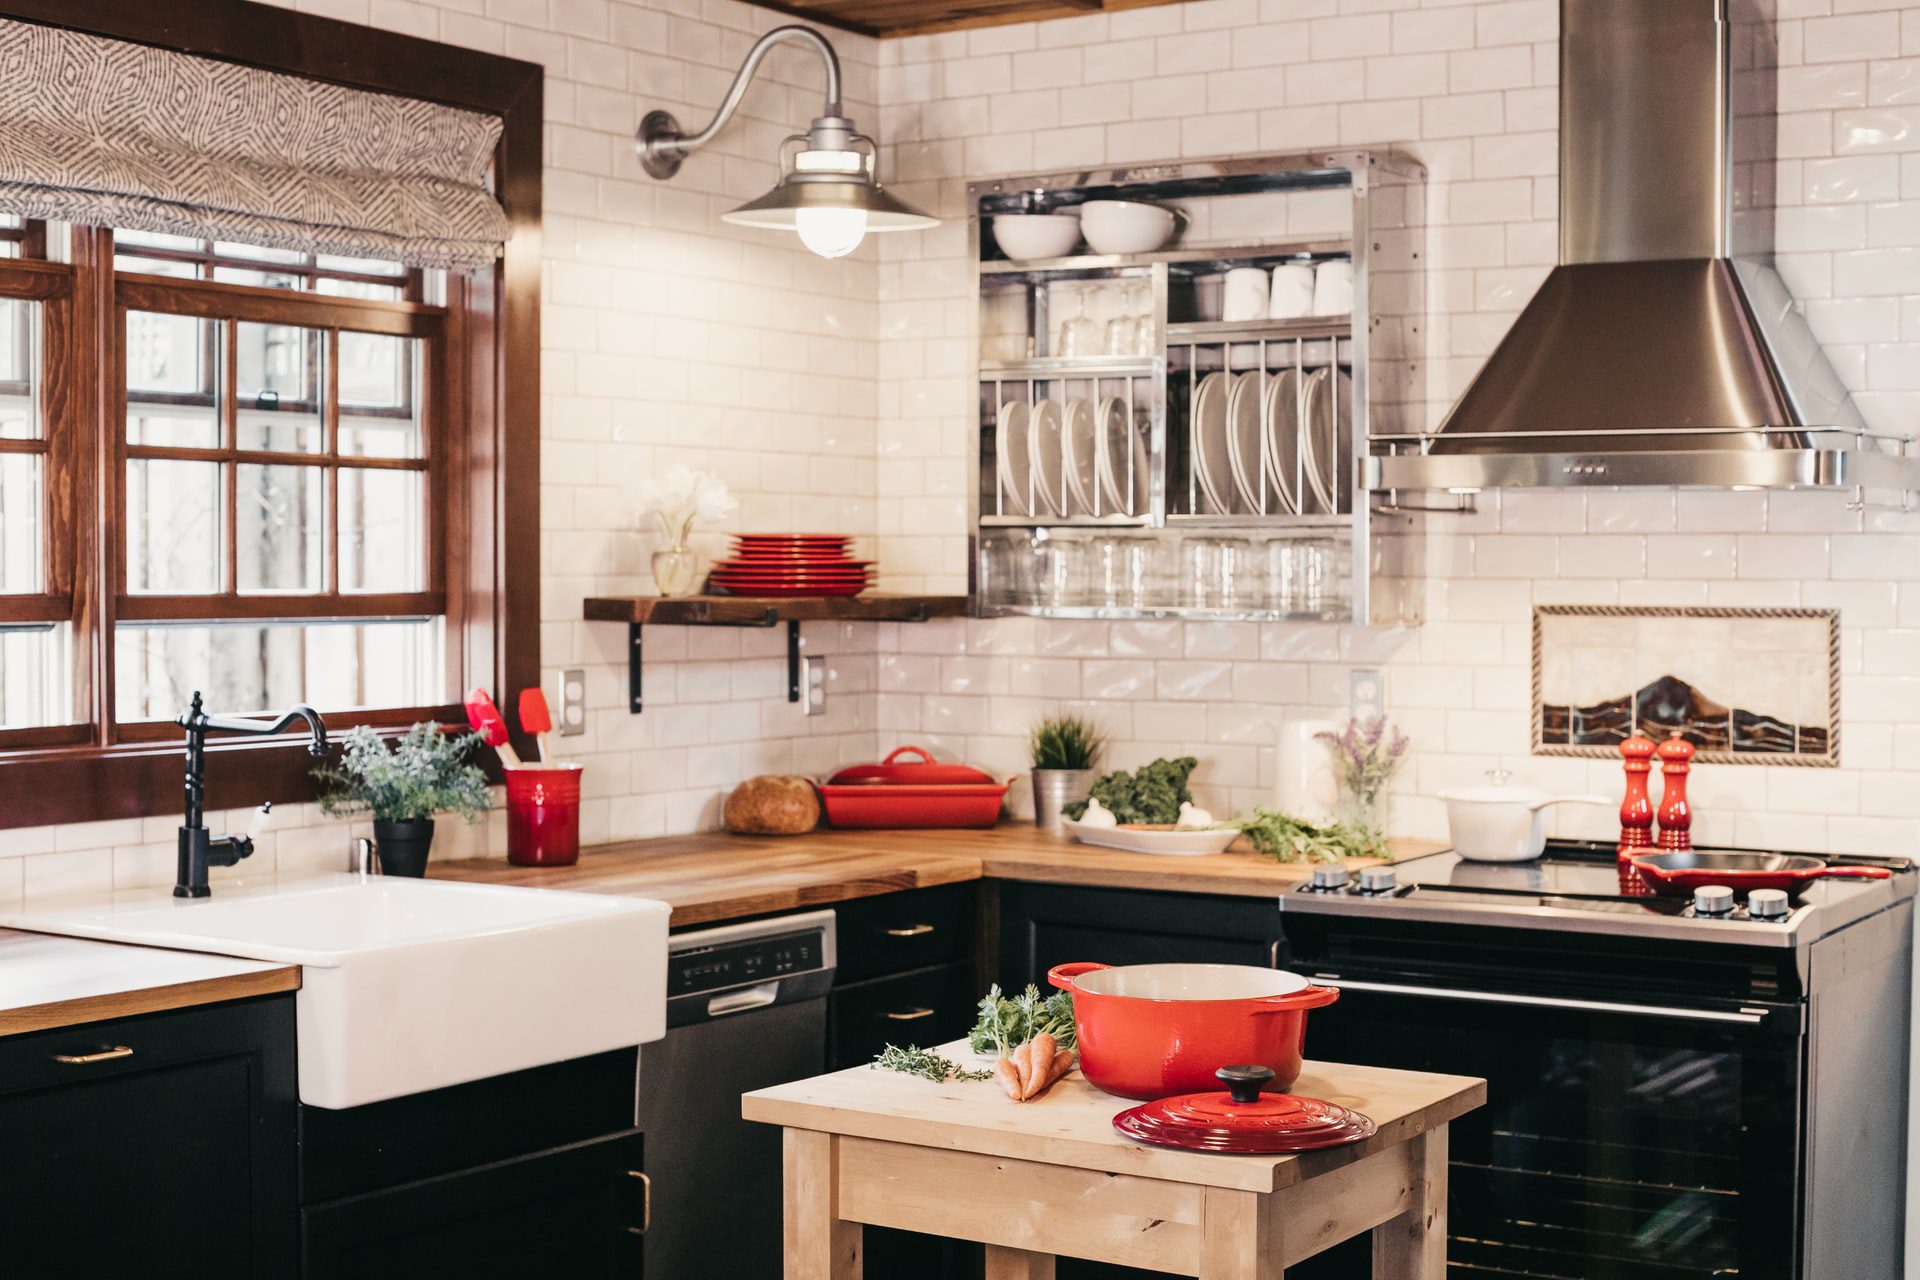 A Kitchen With Red Cooking Ware